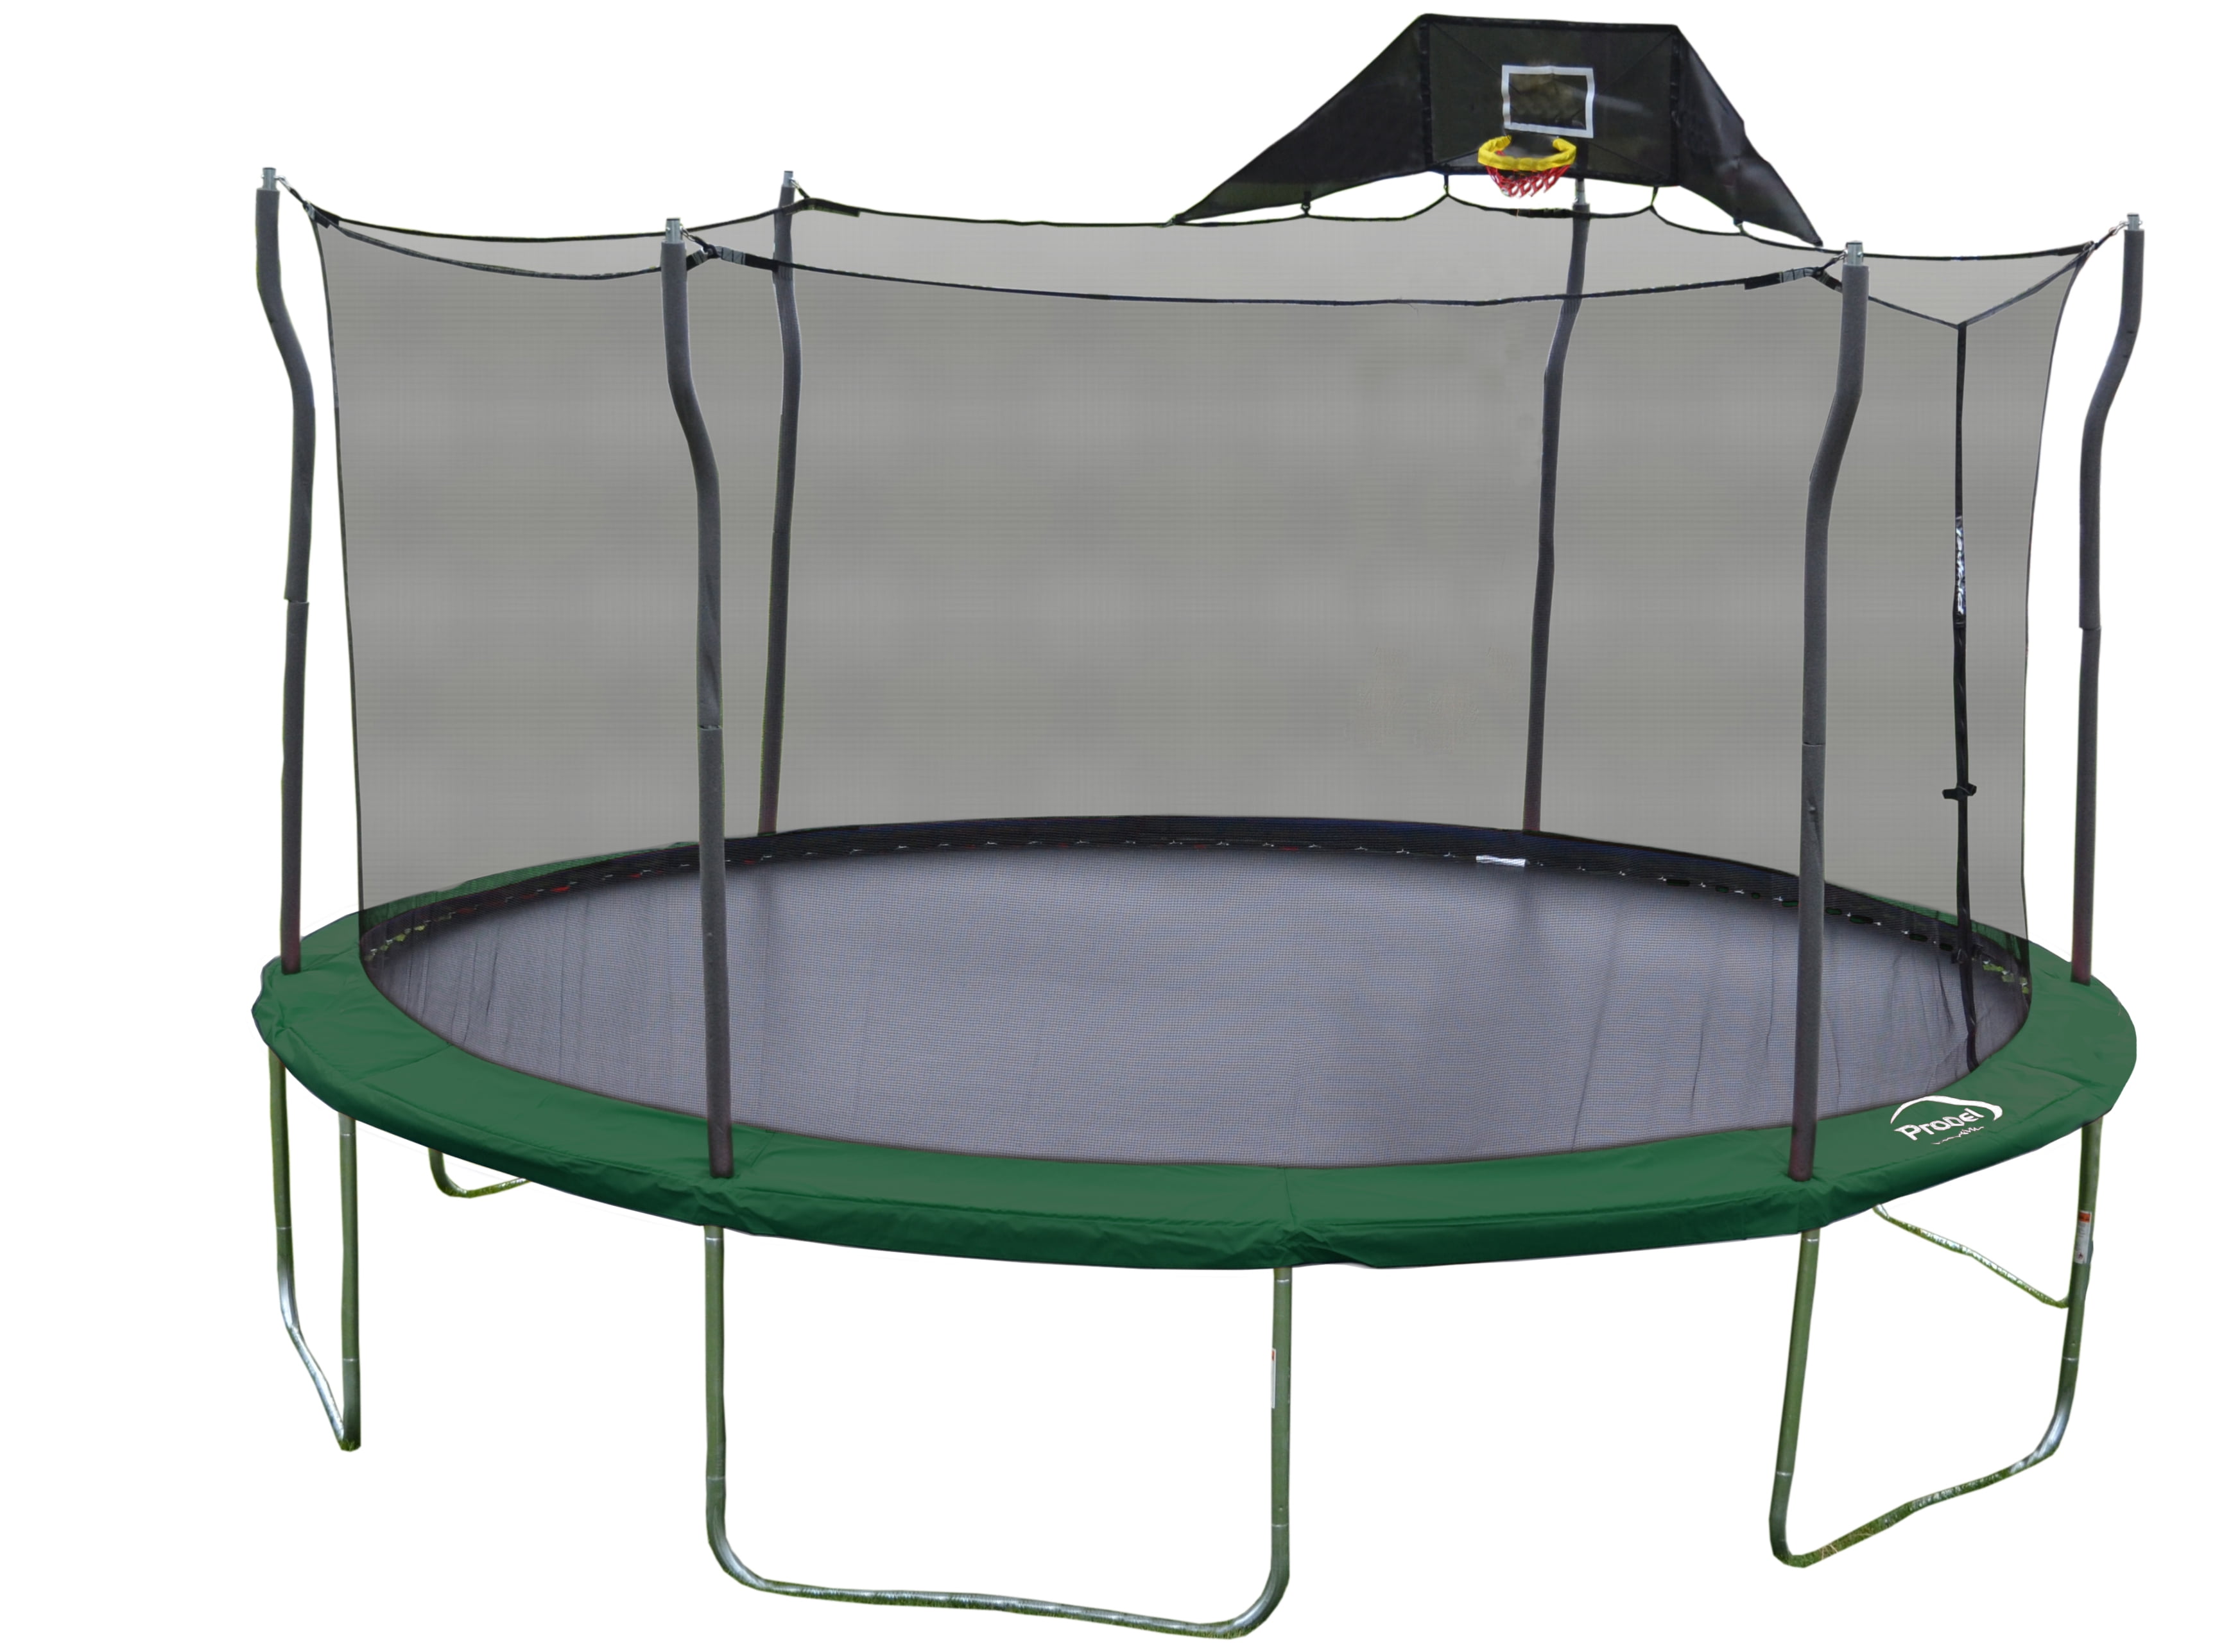 Propel 15' Round with Safety Enclosure and Basketball Hoop - Walmart.com